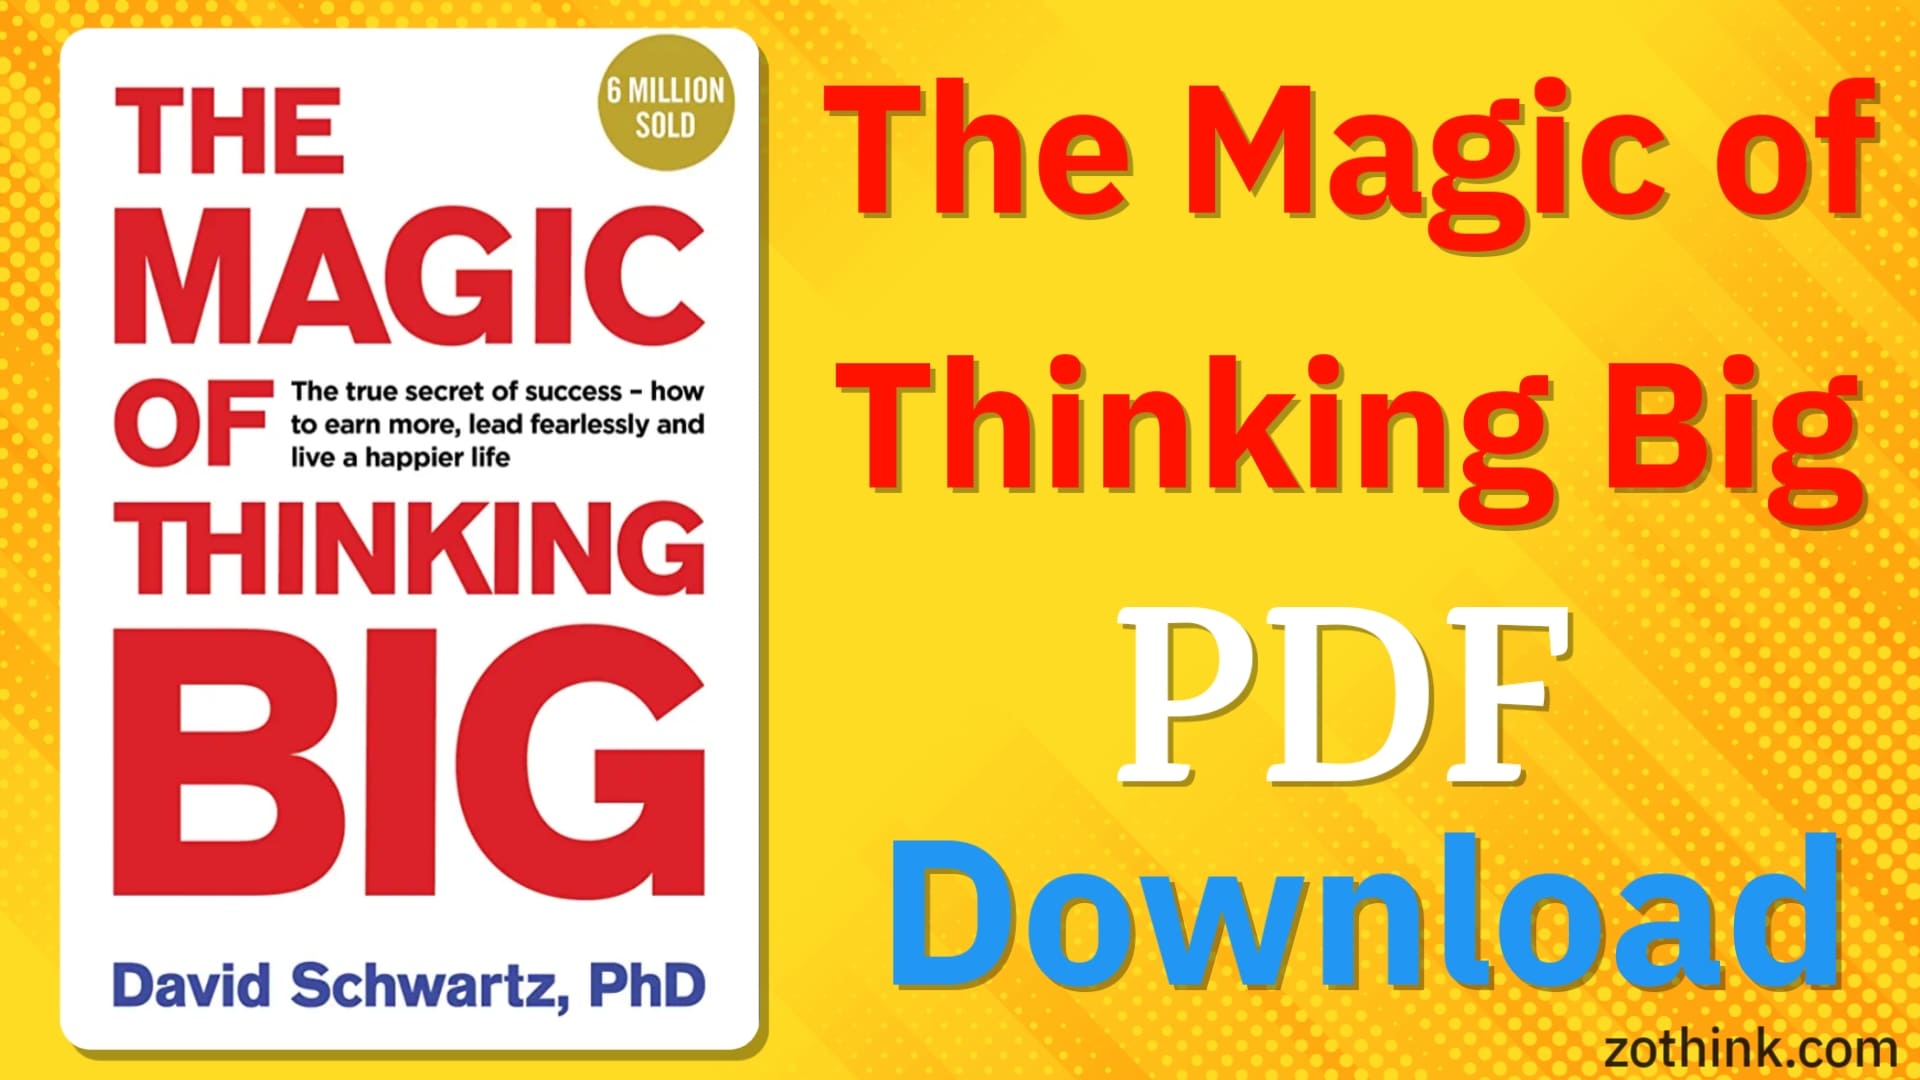 The Magic of Thinking Big PDF Download | The Magic of Thinking Big English PDF